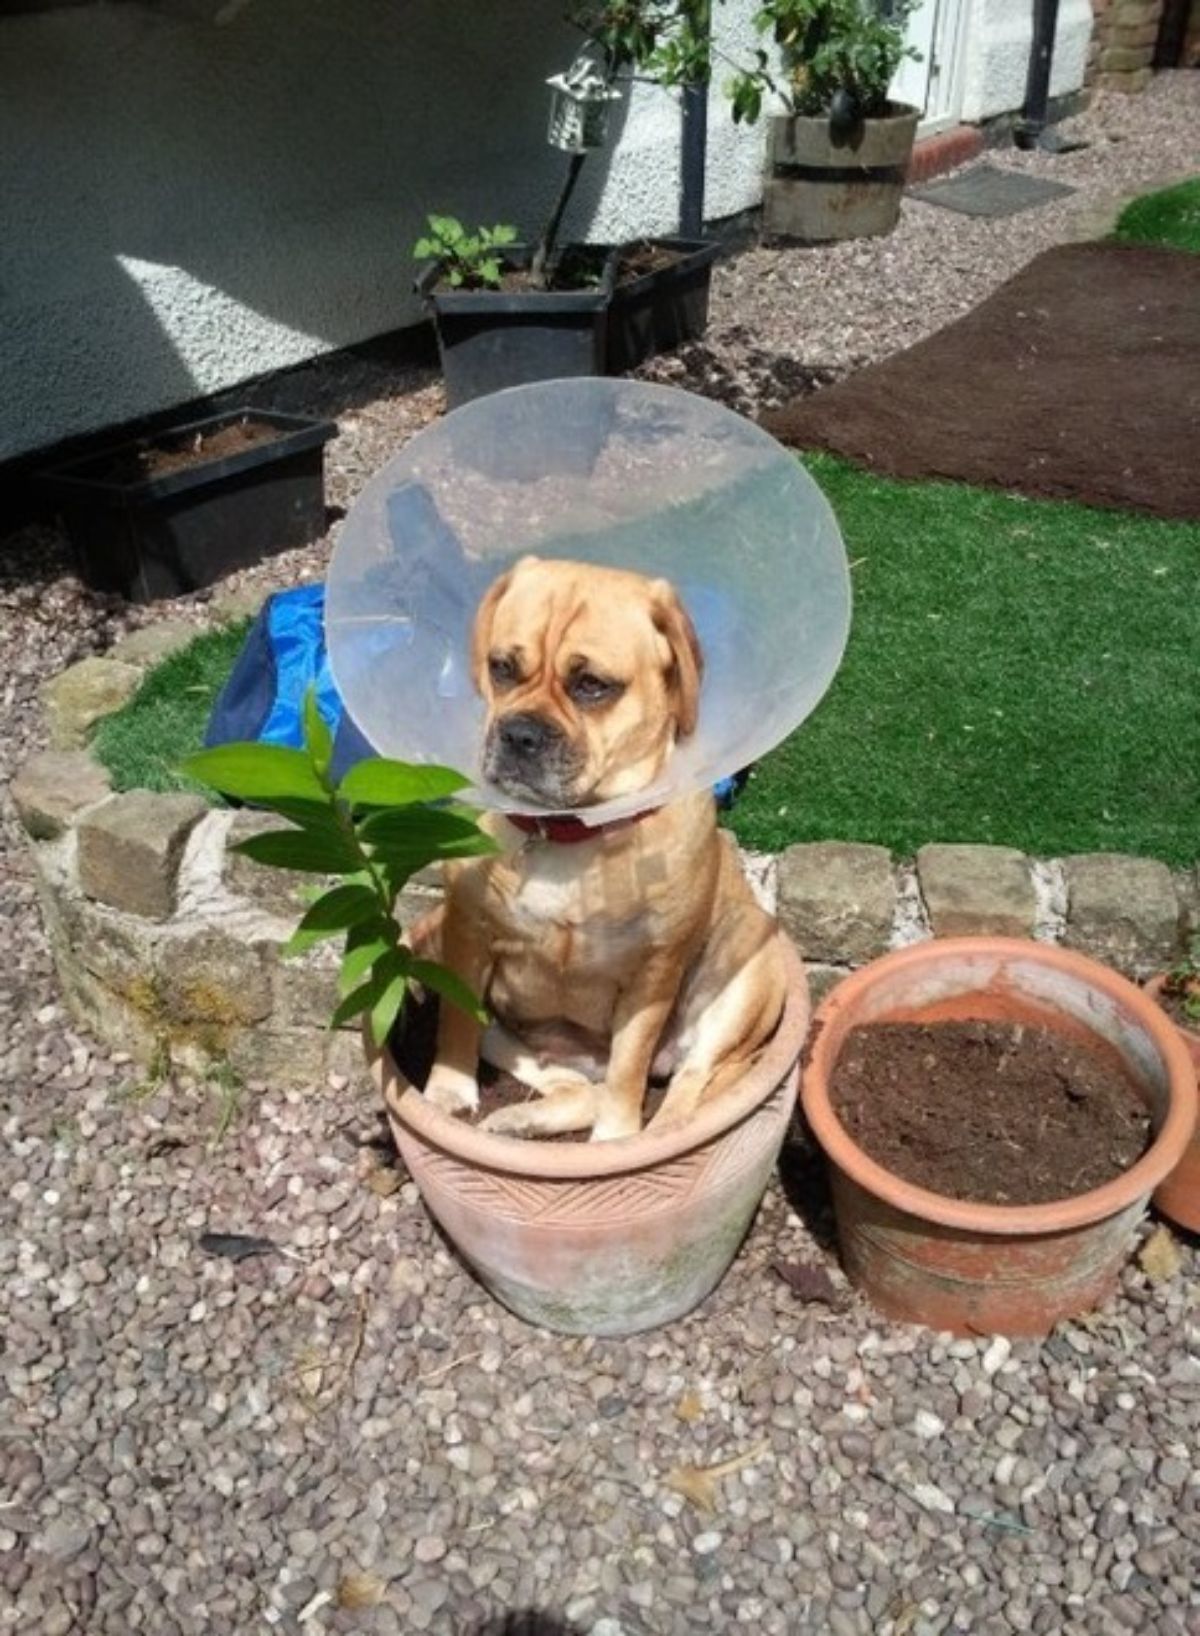 brown and white dog in a plastic cone sitting in a brown pot with a plant in it